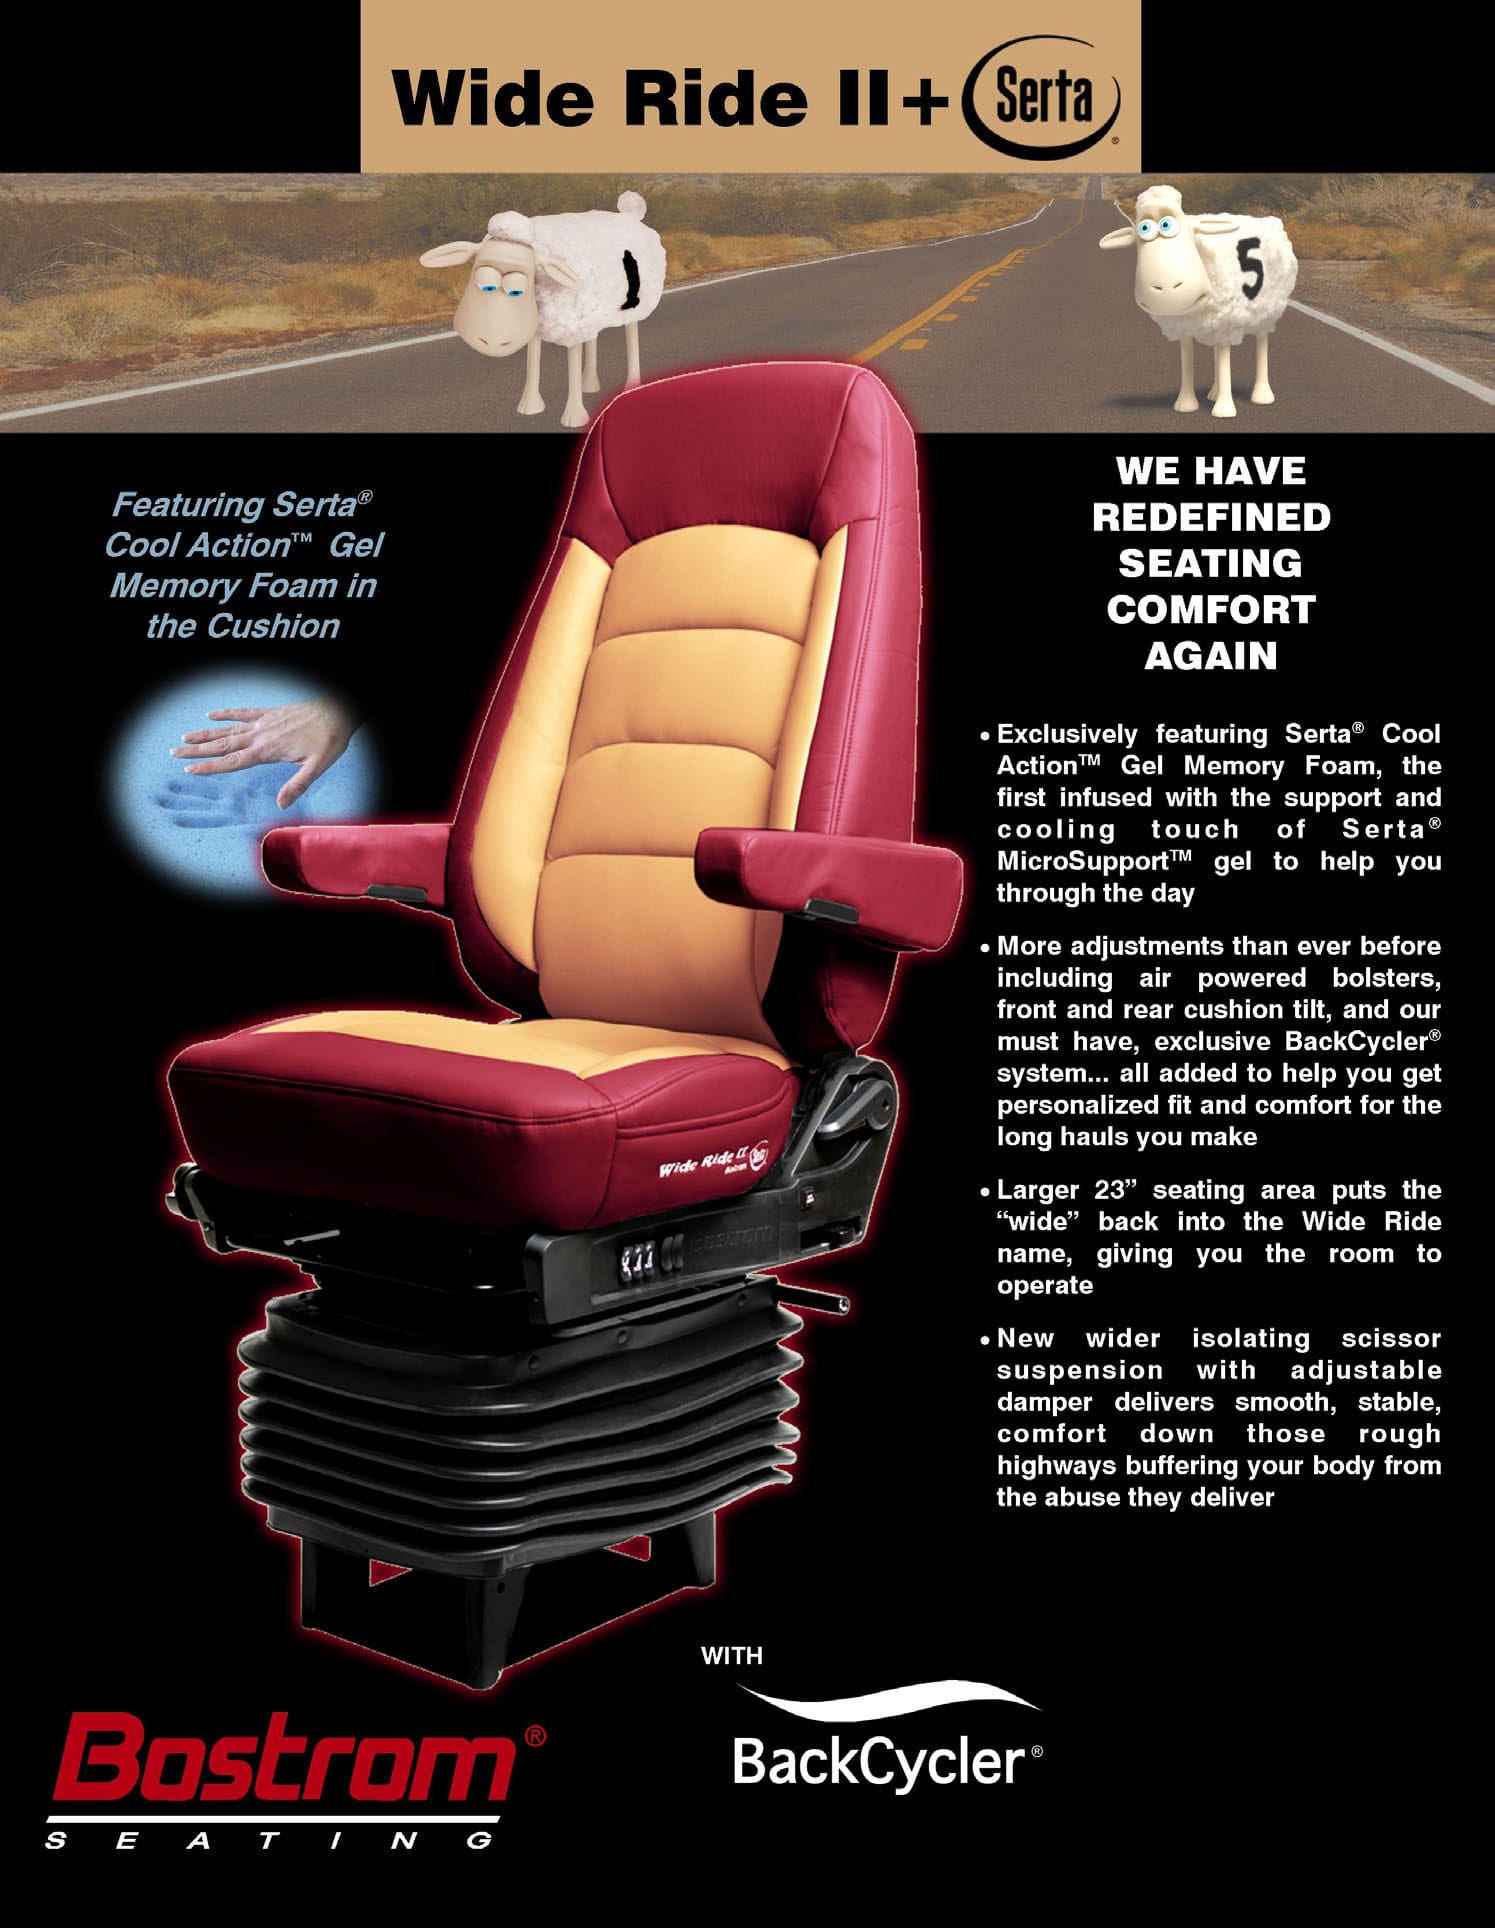 Bostrom Seat Cover & Seat Cushion Replacement Refresh Kit